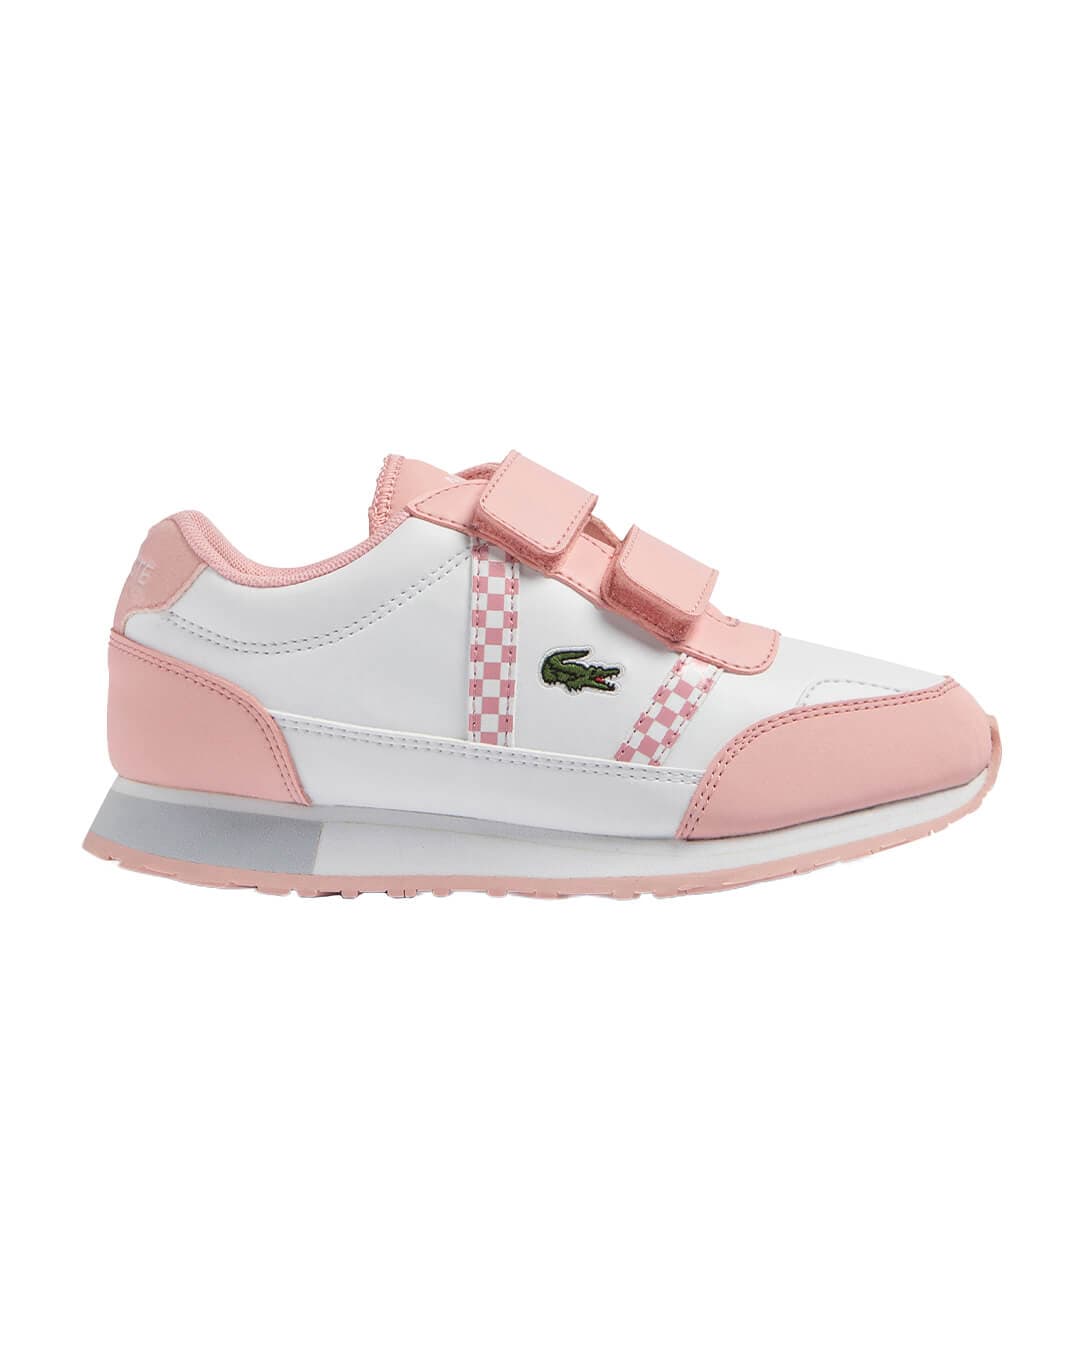 Lacoste Shoes Lacoste Partner White and Pink Sneakers